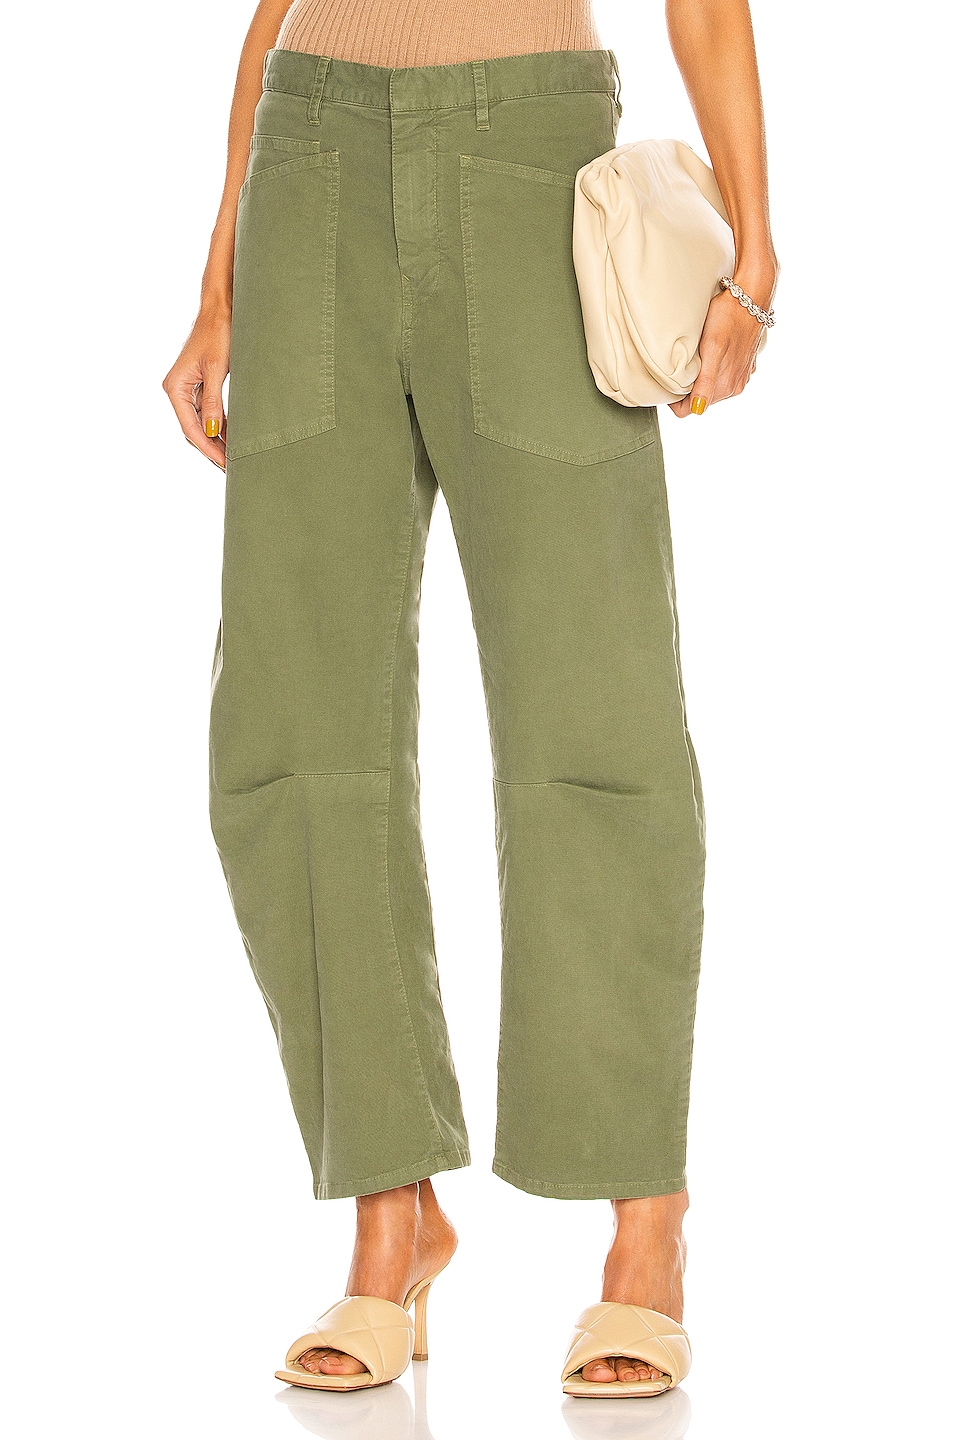 Shon Pant in Olive